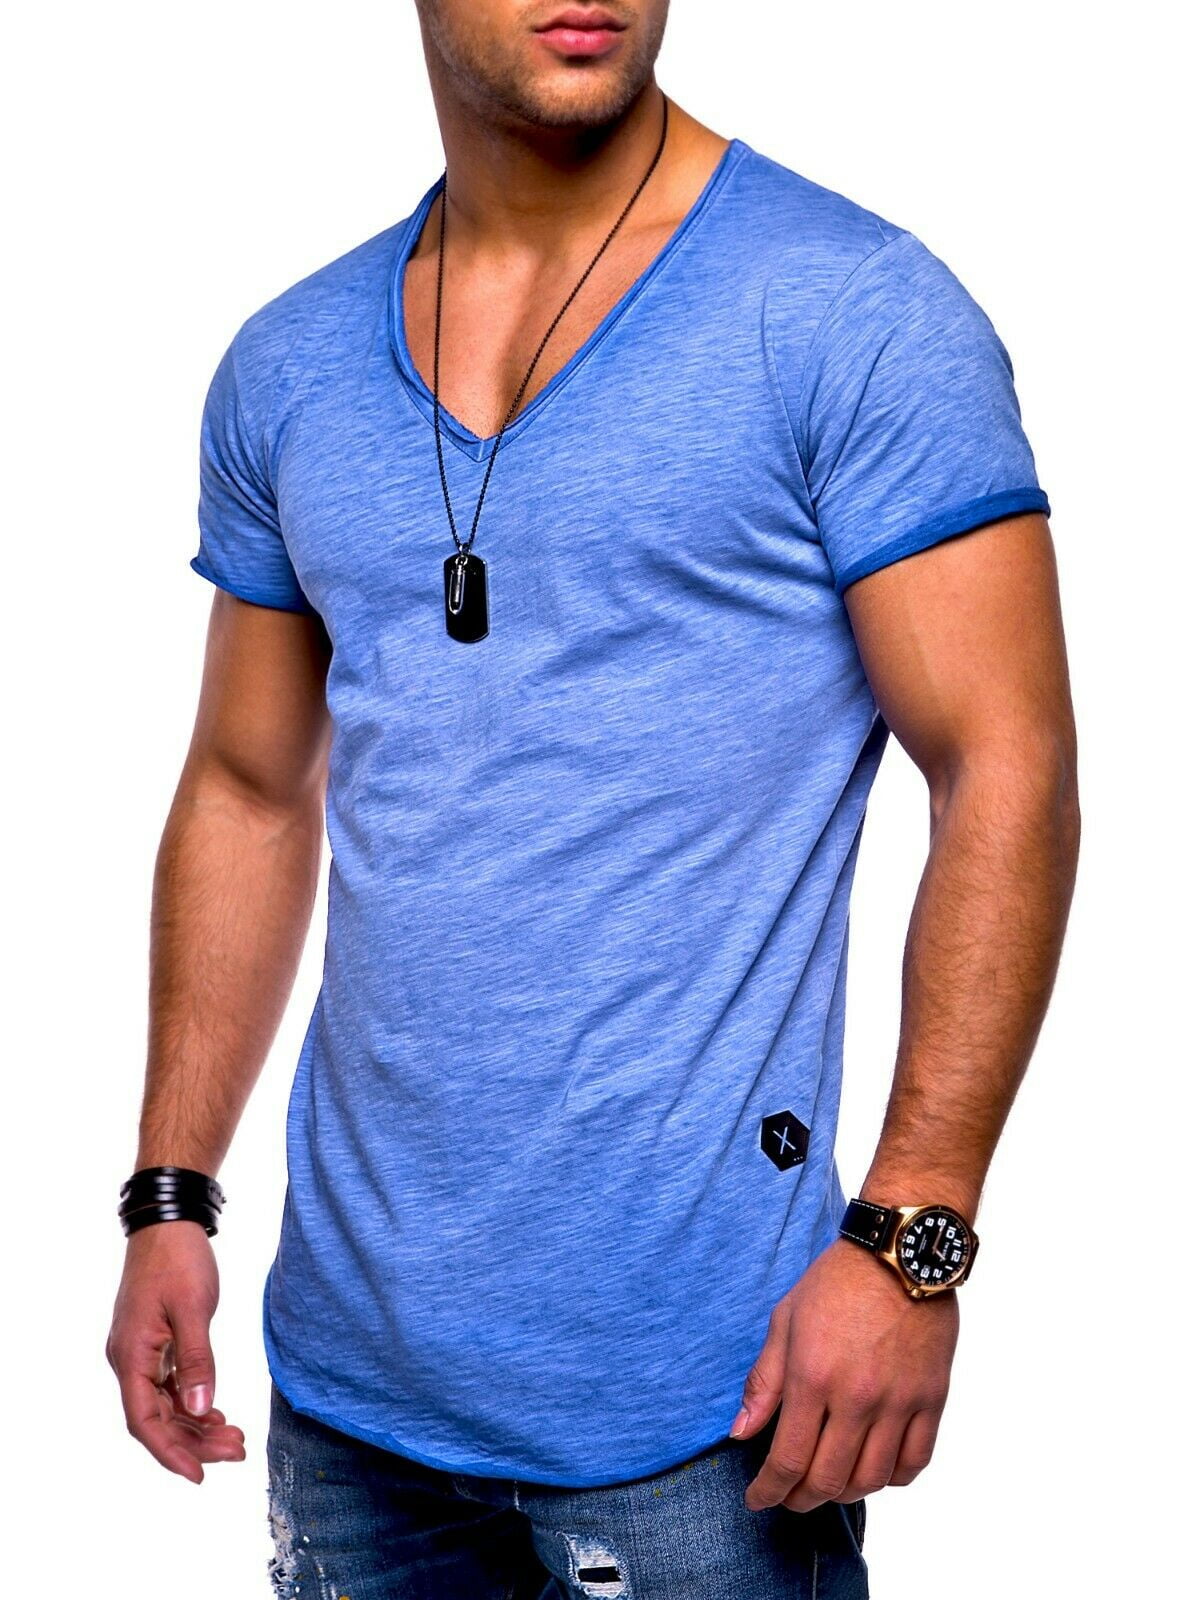 BEHYPE Men's Basic T-Shirt Polo Muscle Tee Casual Tops MT-7102 (Blue ...